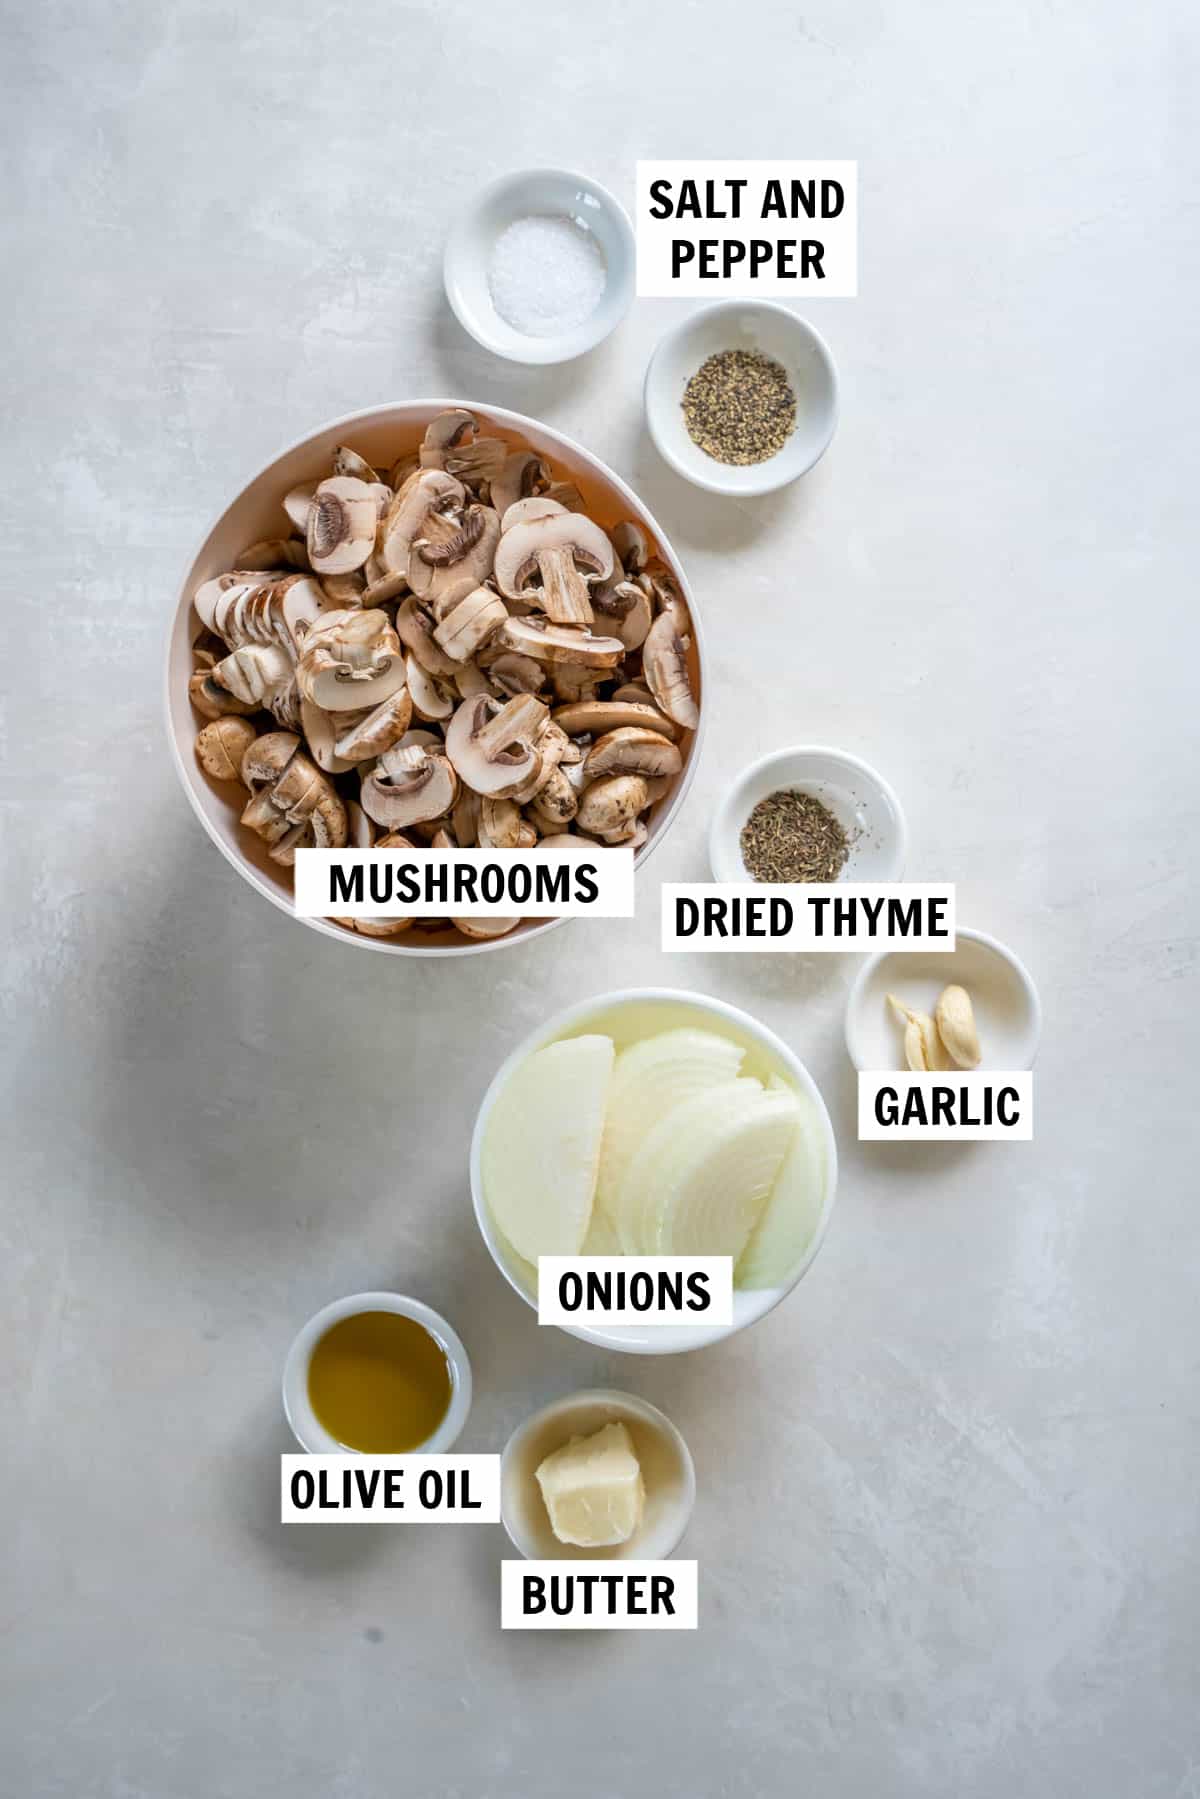 All of the ingredients for sauteed mushrooms and onions on a white countertop including mushrooms, onion, garlic, olive oil, salt, pepper and thyme.